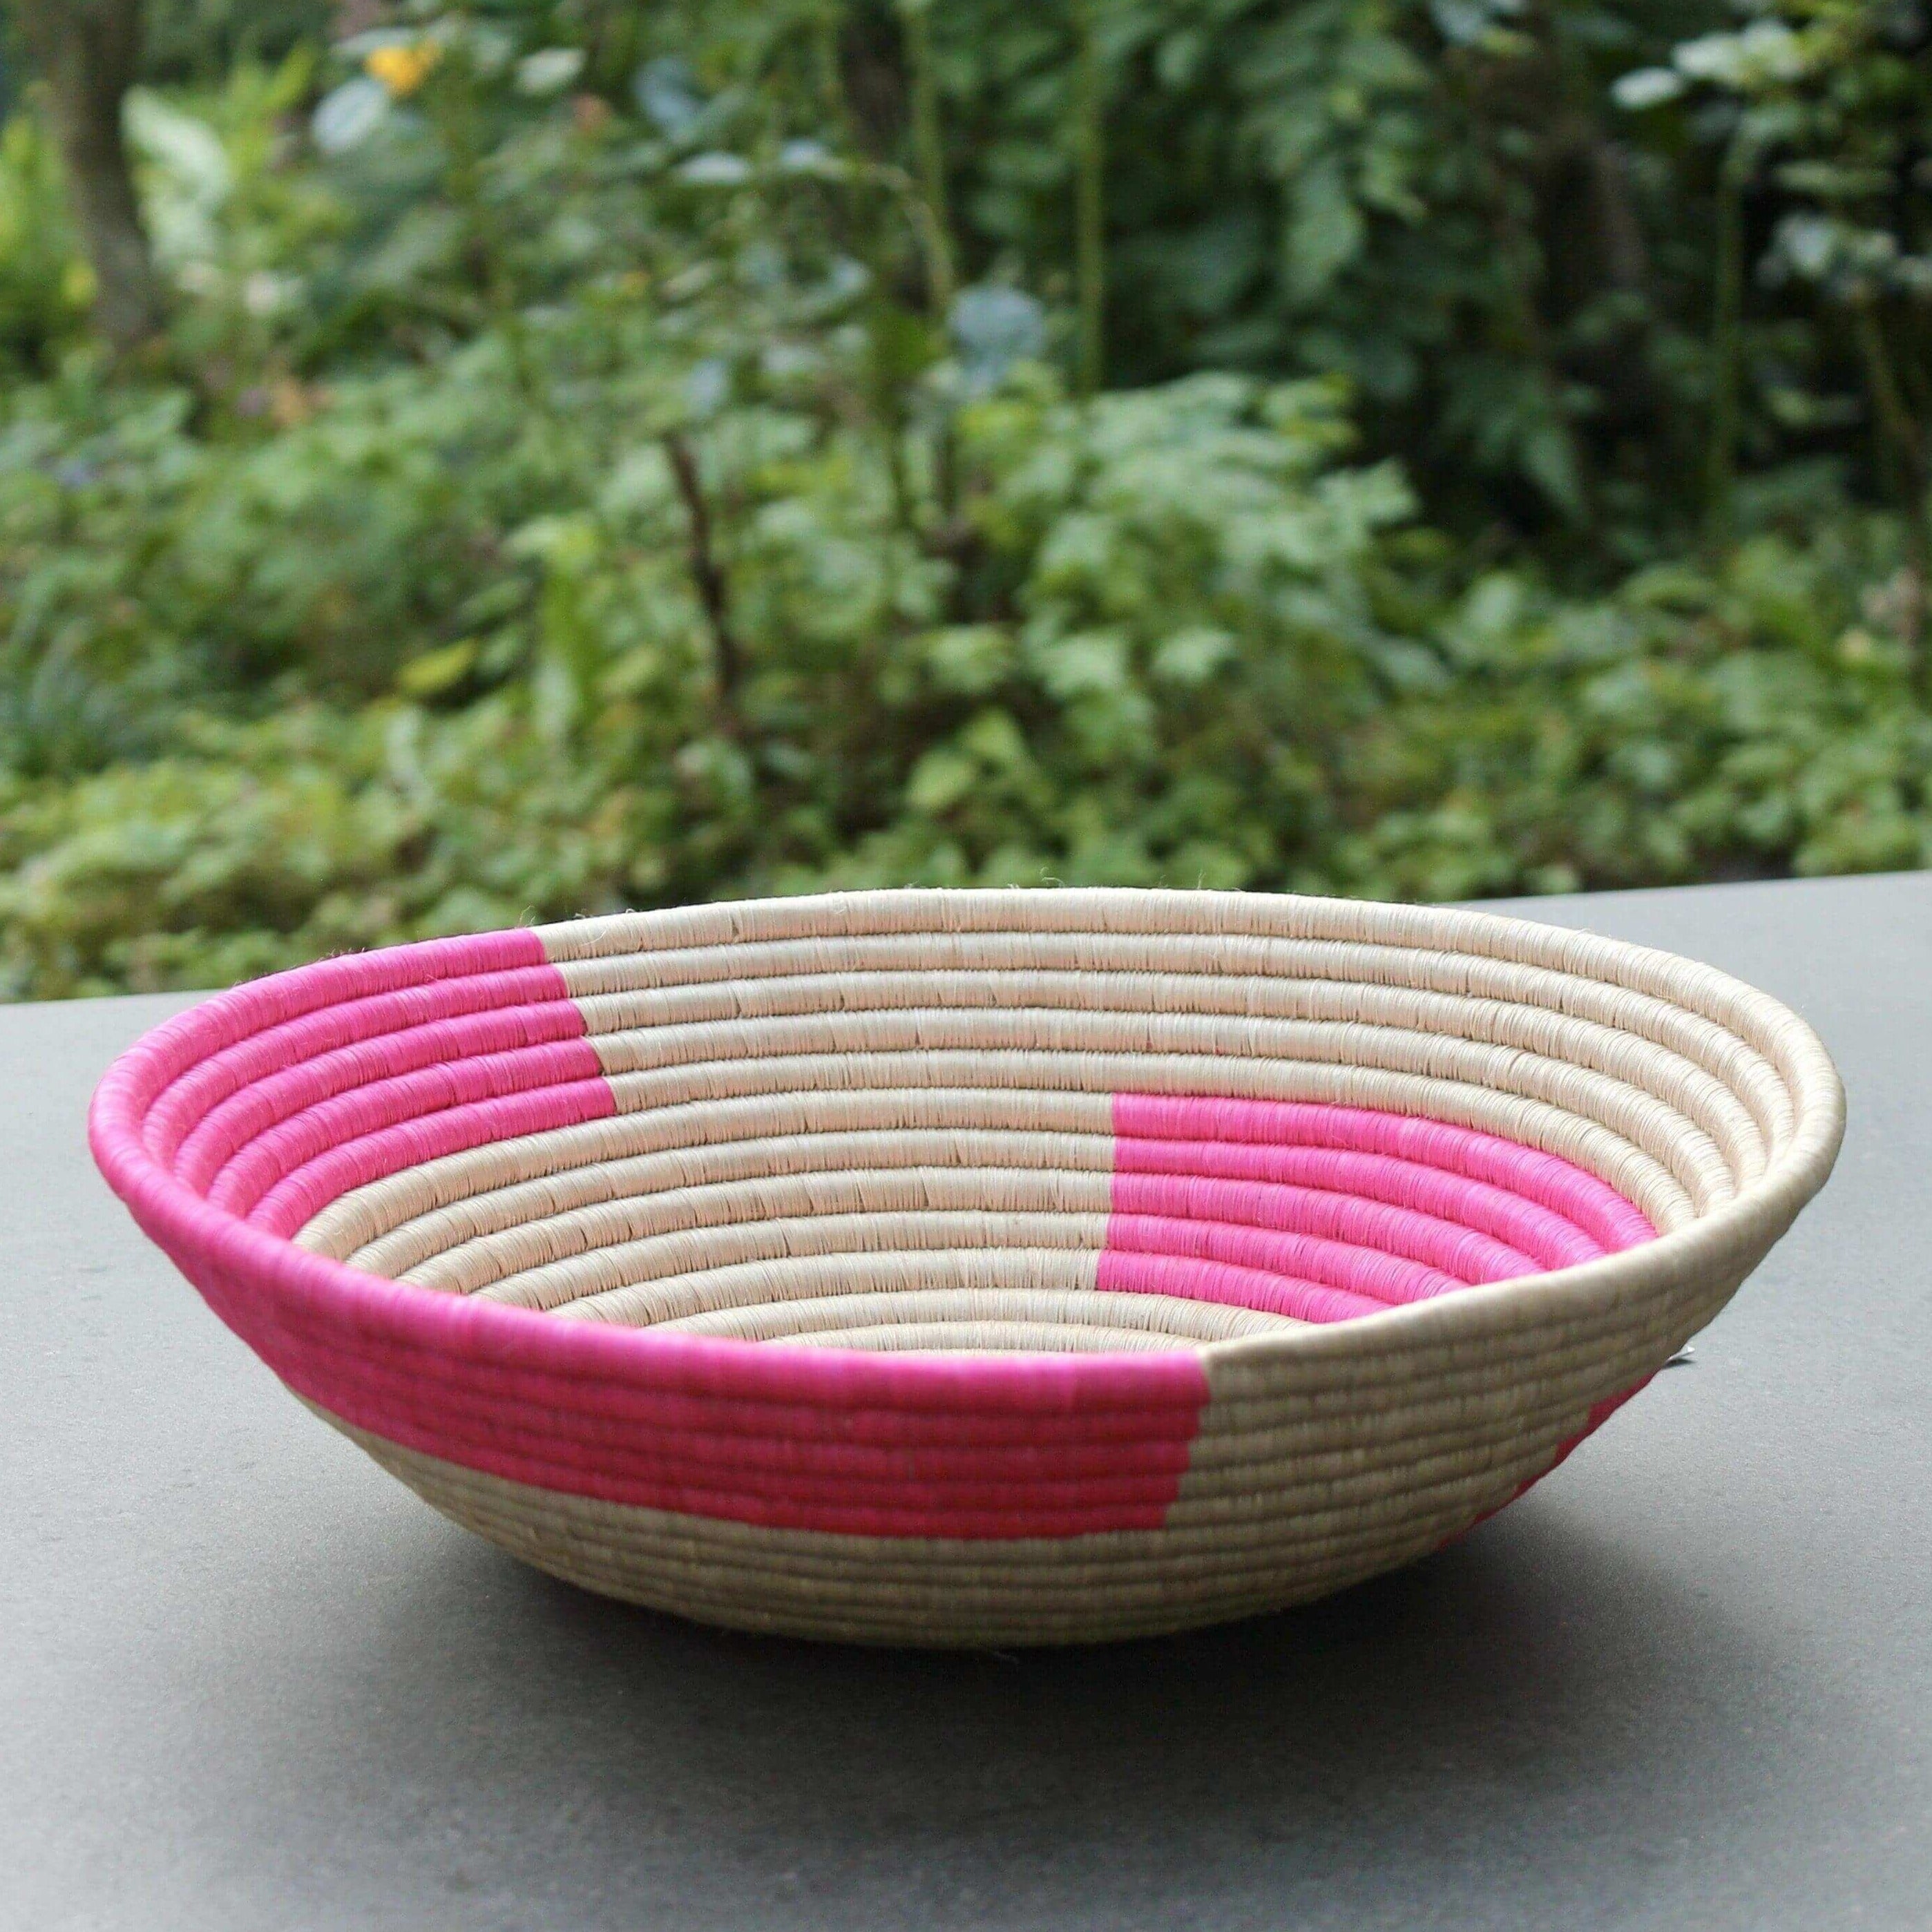 Ethically handmade pink and natural seagrass fruit bowl